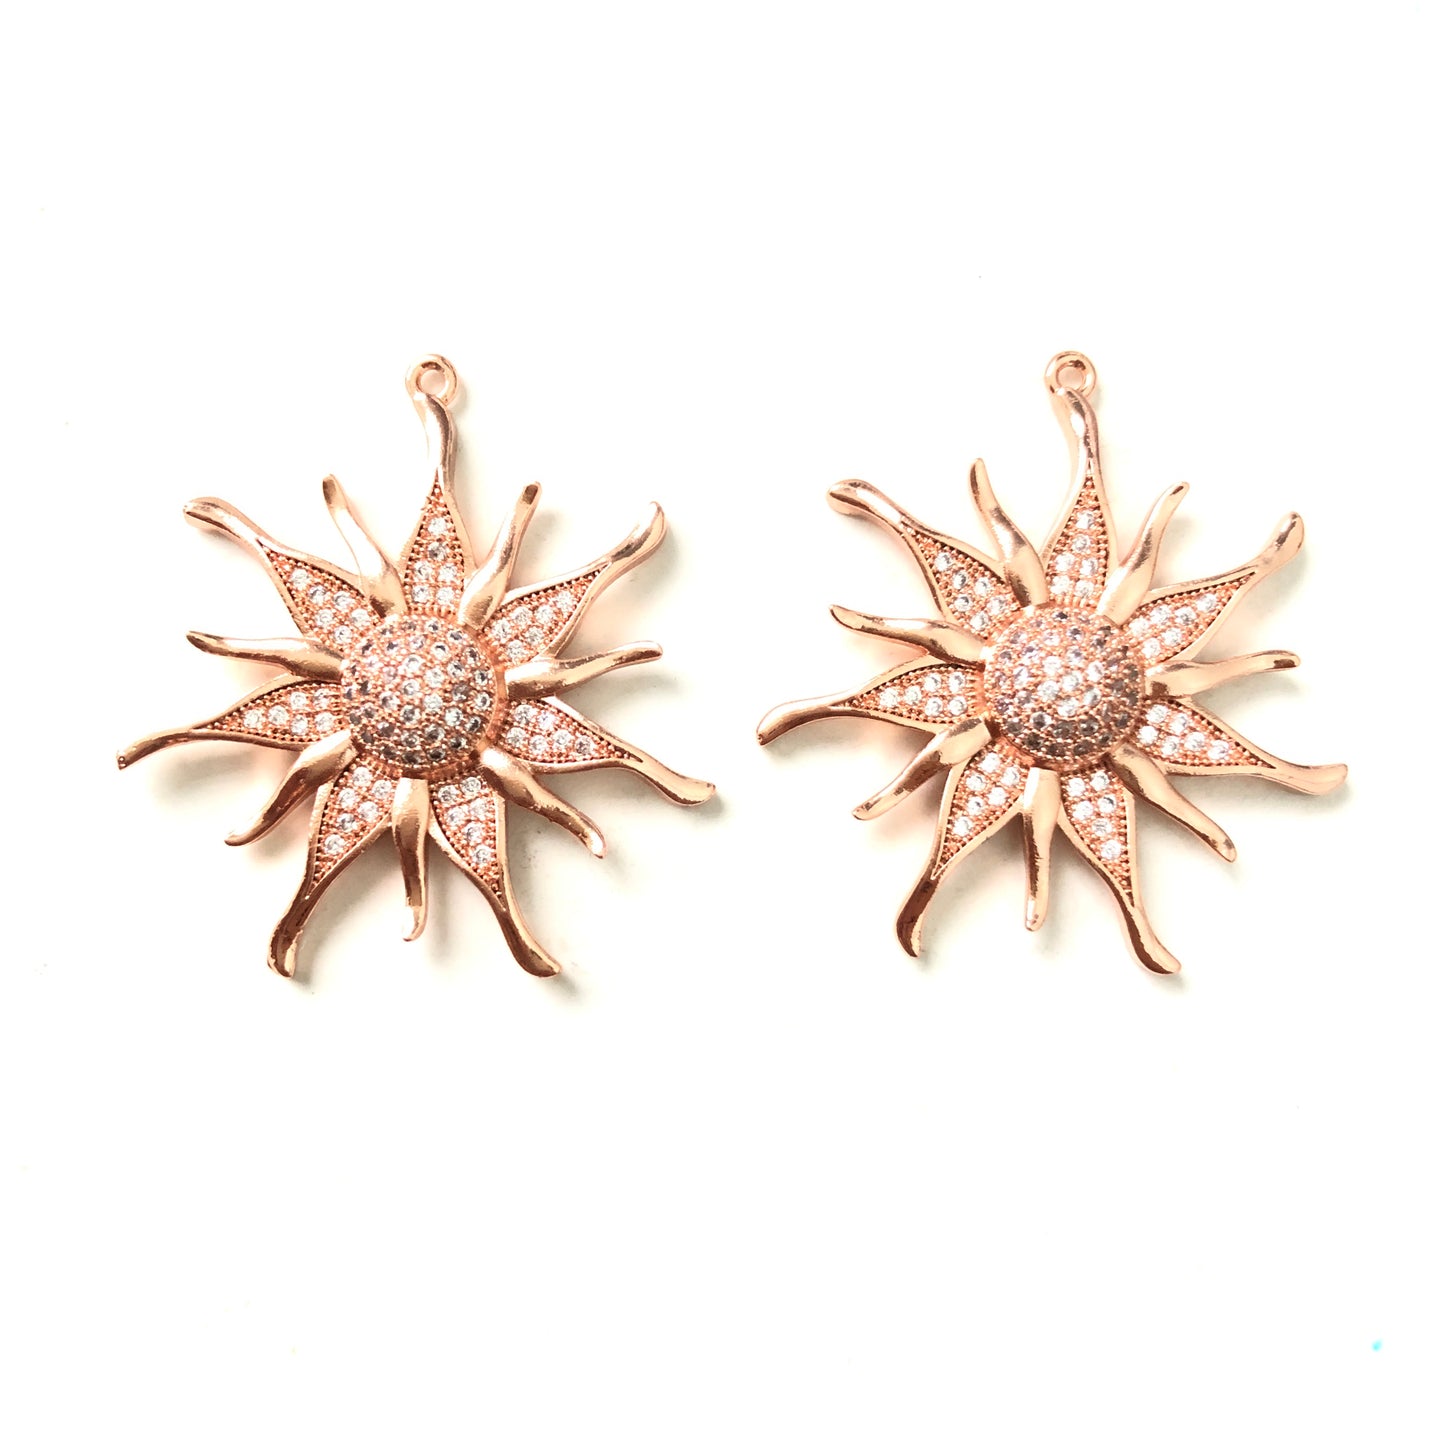 10pcs/lot 35mm CZ Paved Sunflower Charms Rose Gold CZ Paved Charms Large Sizes Sun Moon Stars Charms Beads Beyond